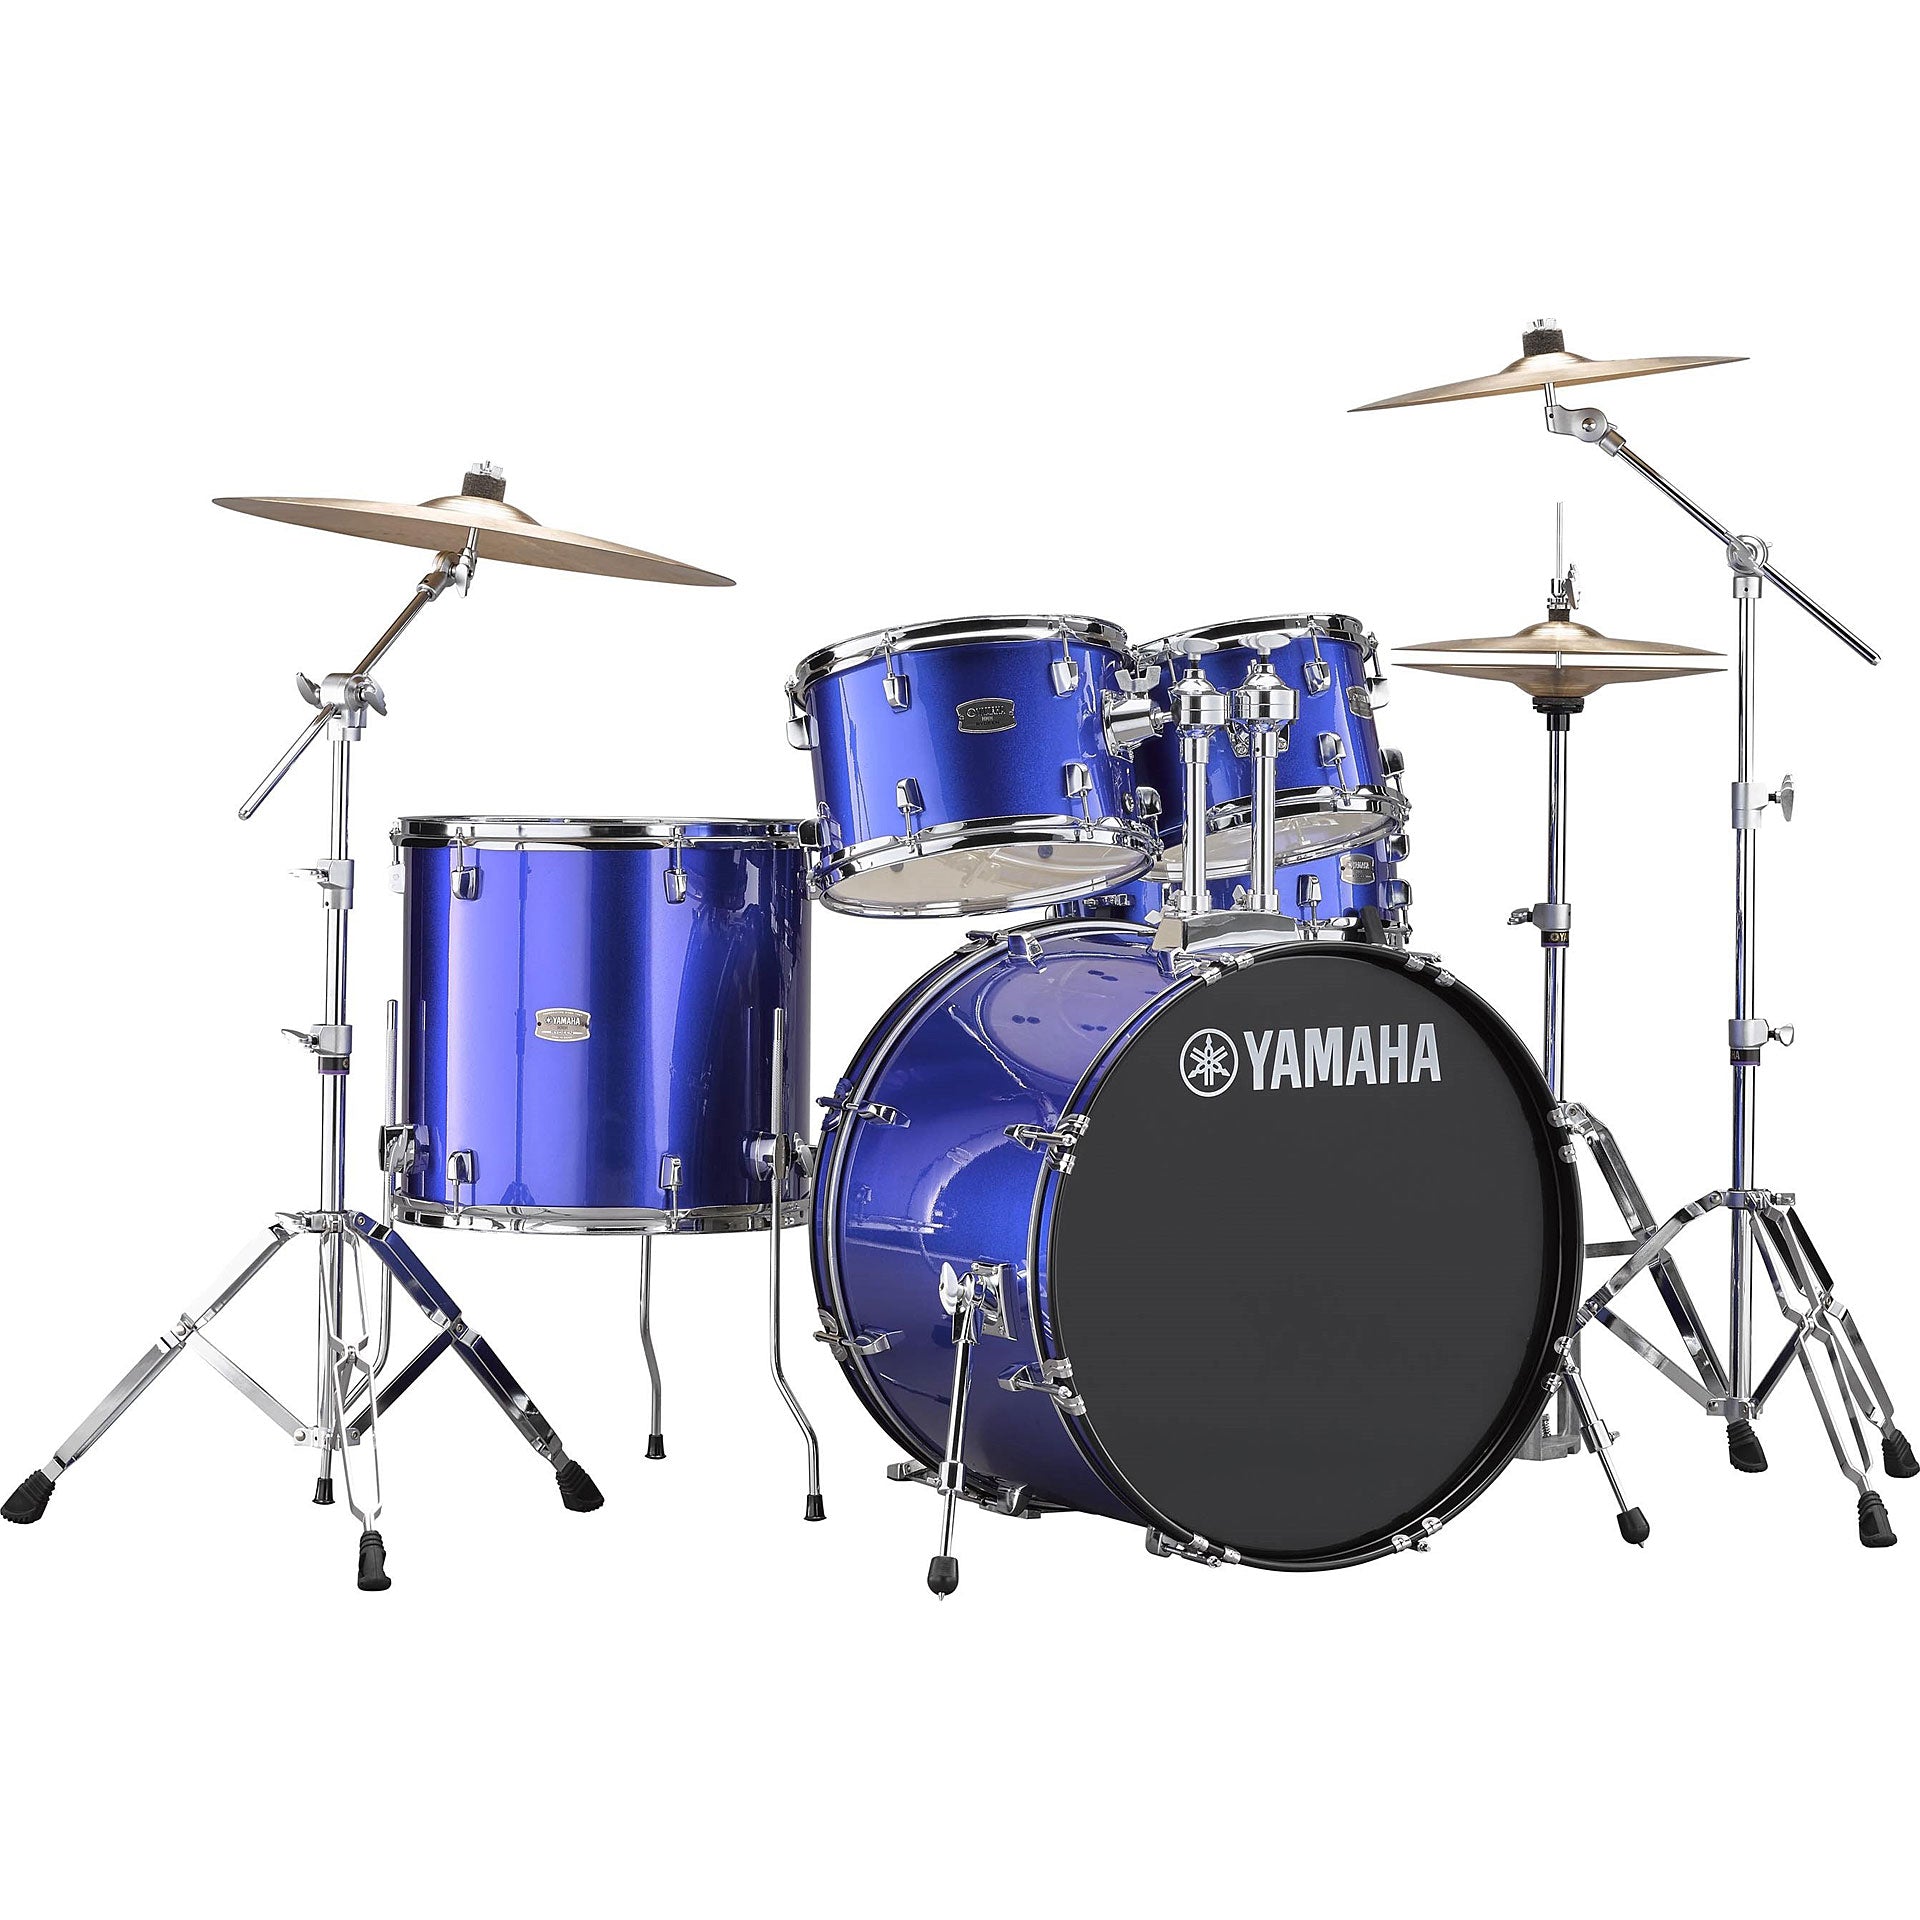 YAMAHA Rydeen 5-pc Drum Set w/ Hardware (Available In 6 Colors)